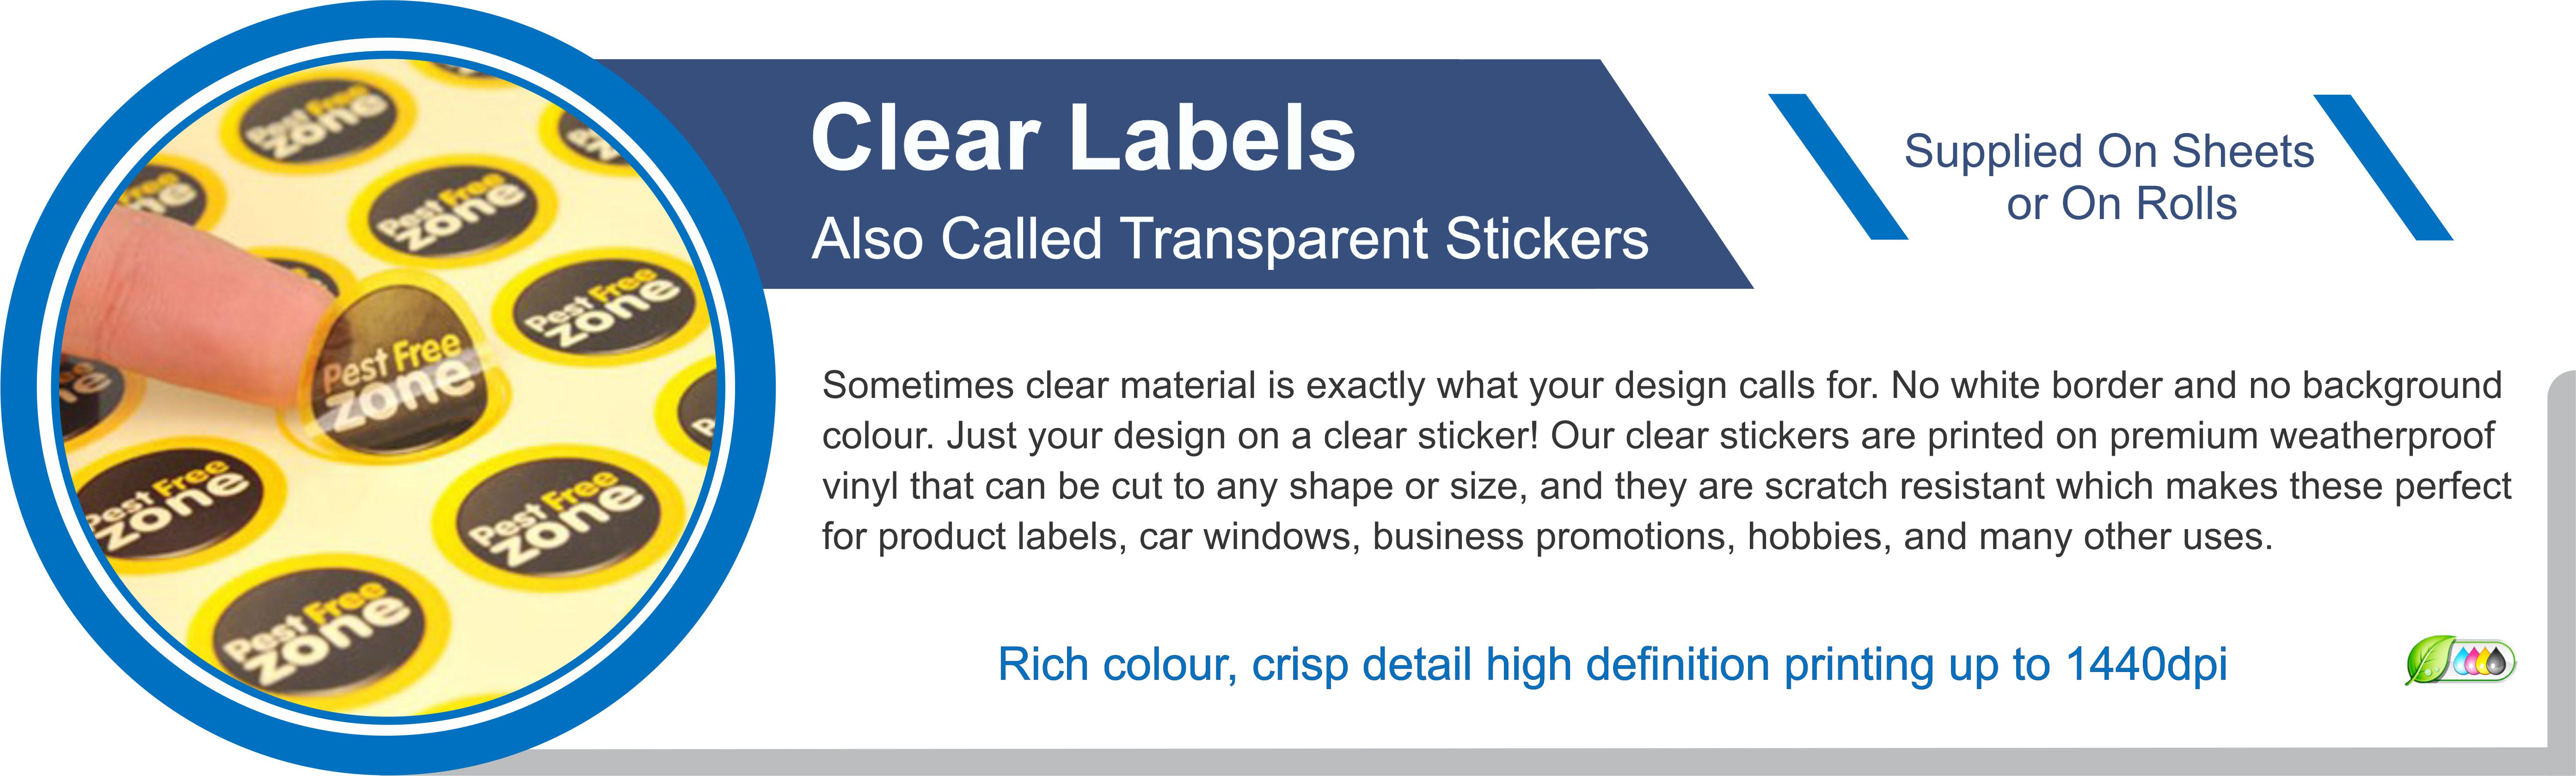 Clear Labels / Stickers